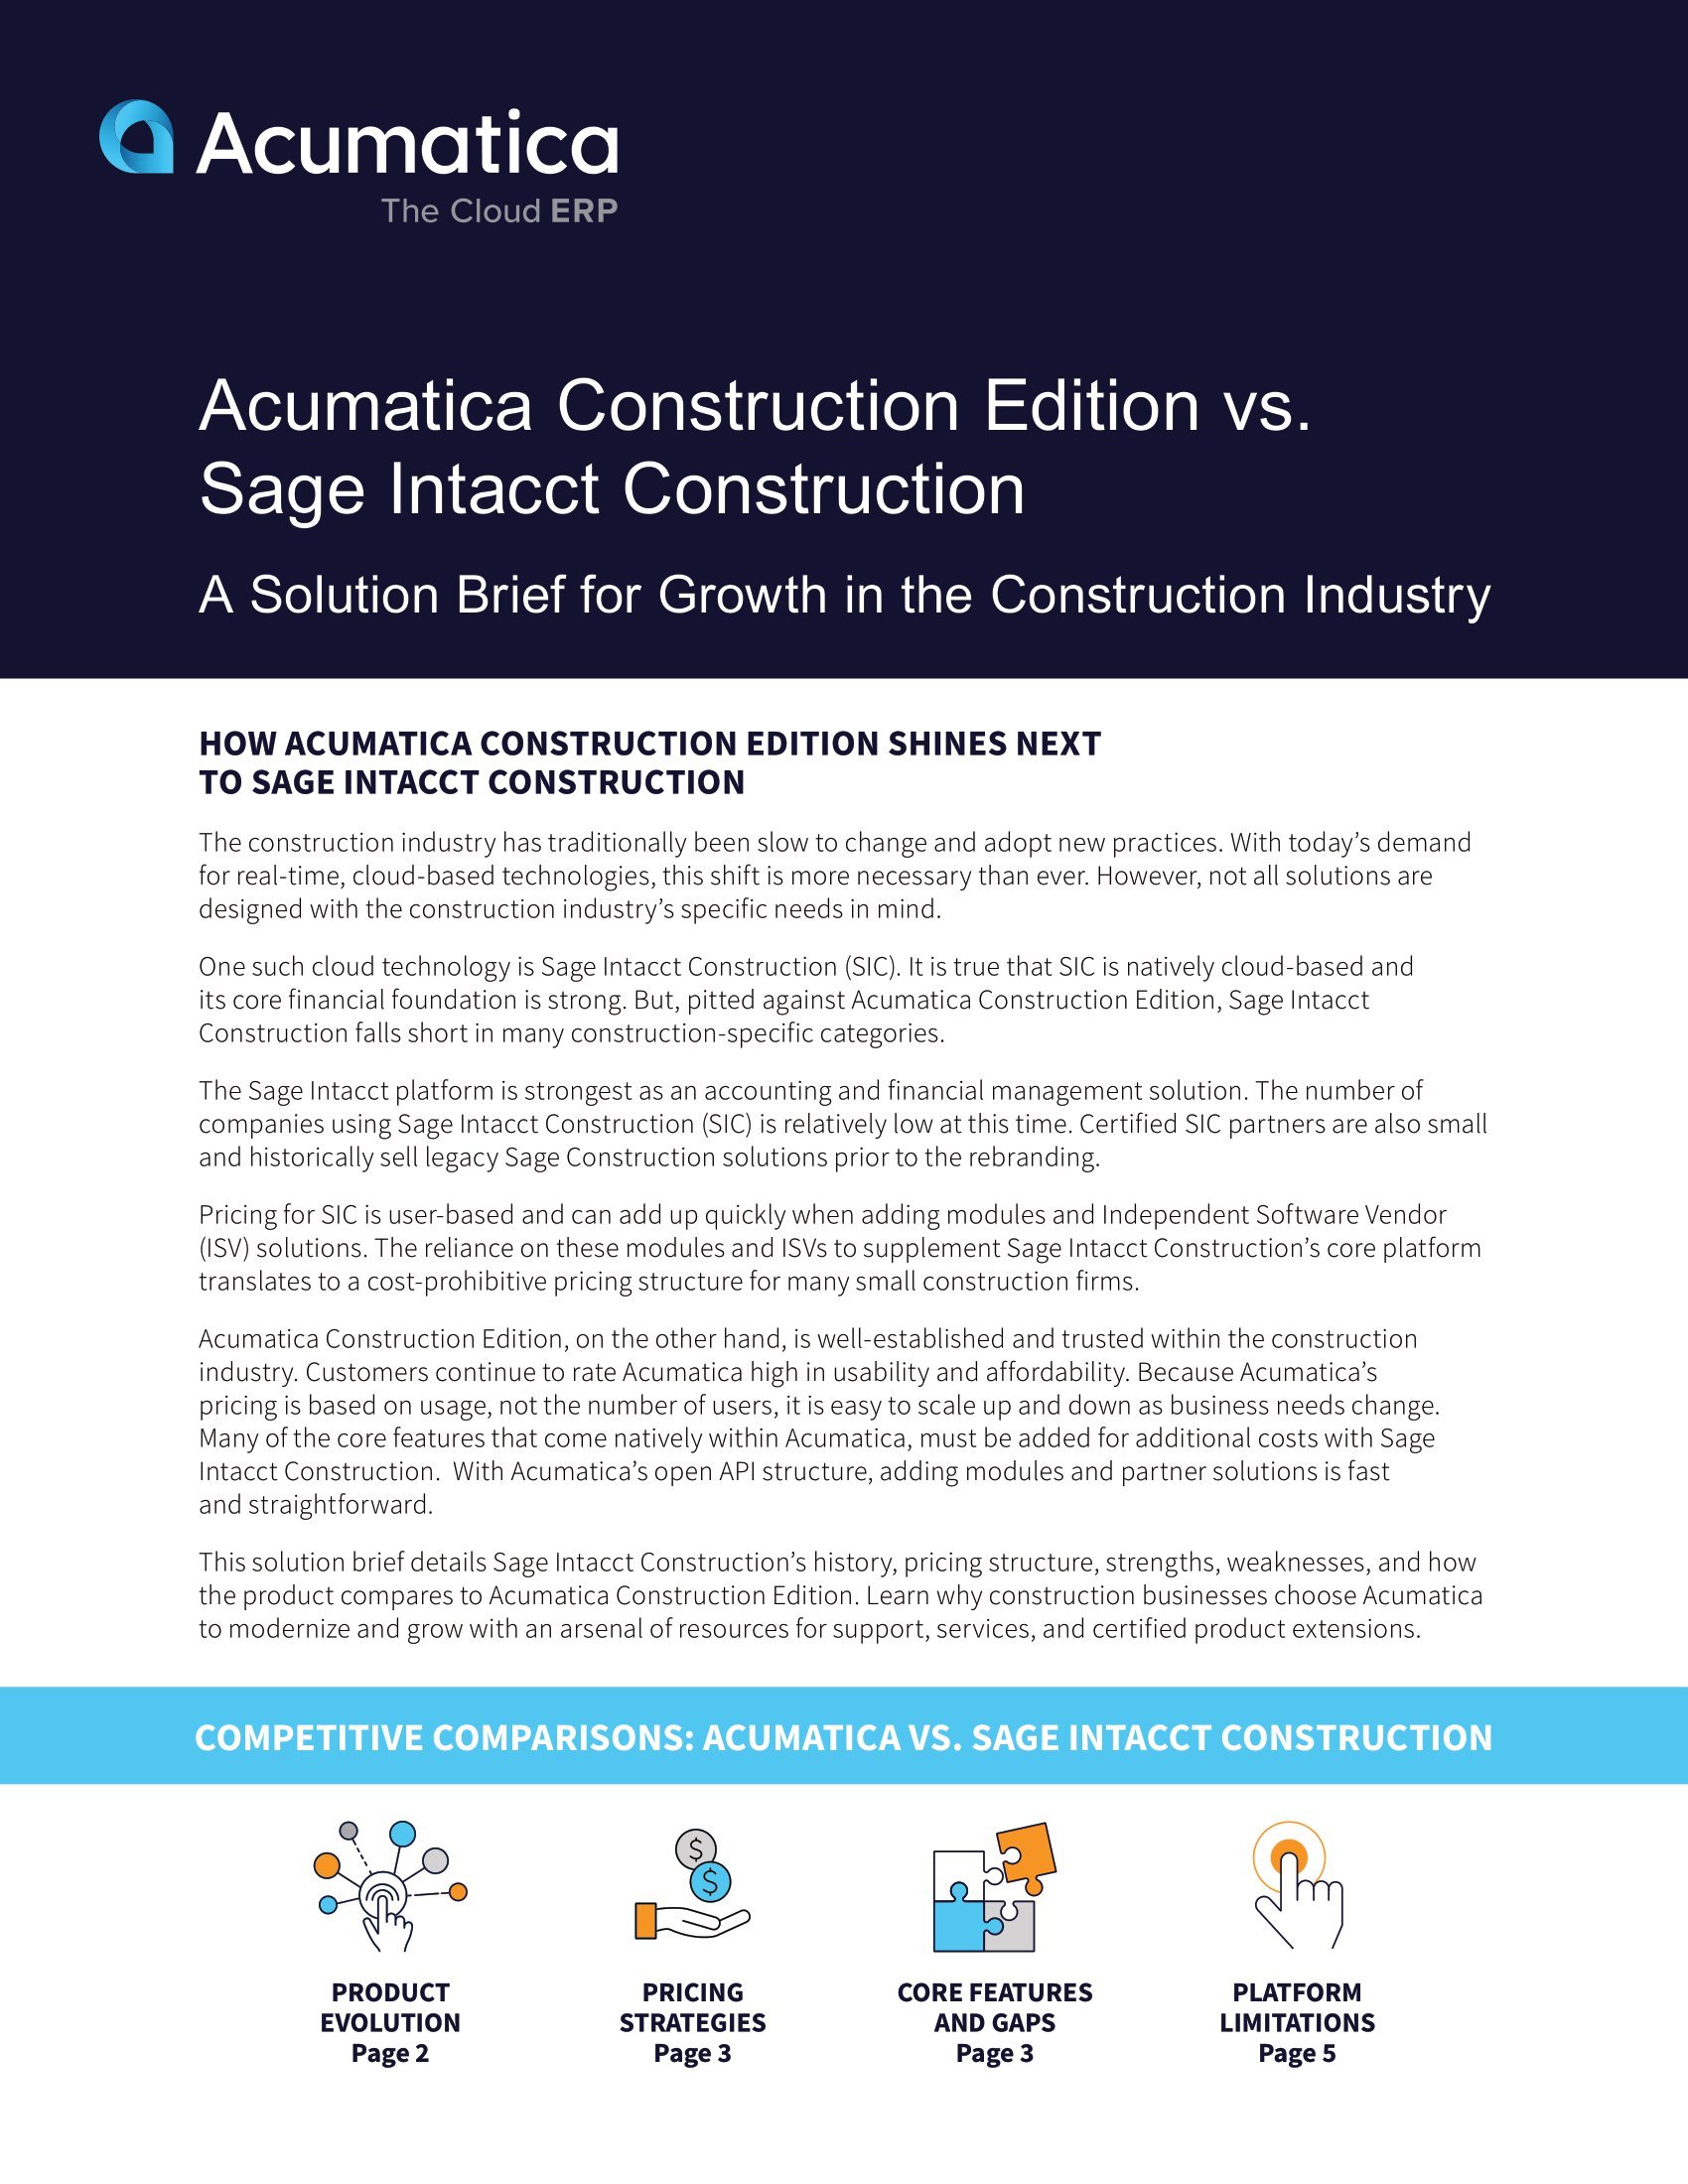 Comparing Acumatica Construction Edition to Sage Intacct Construction